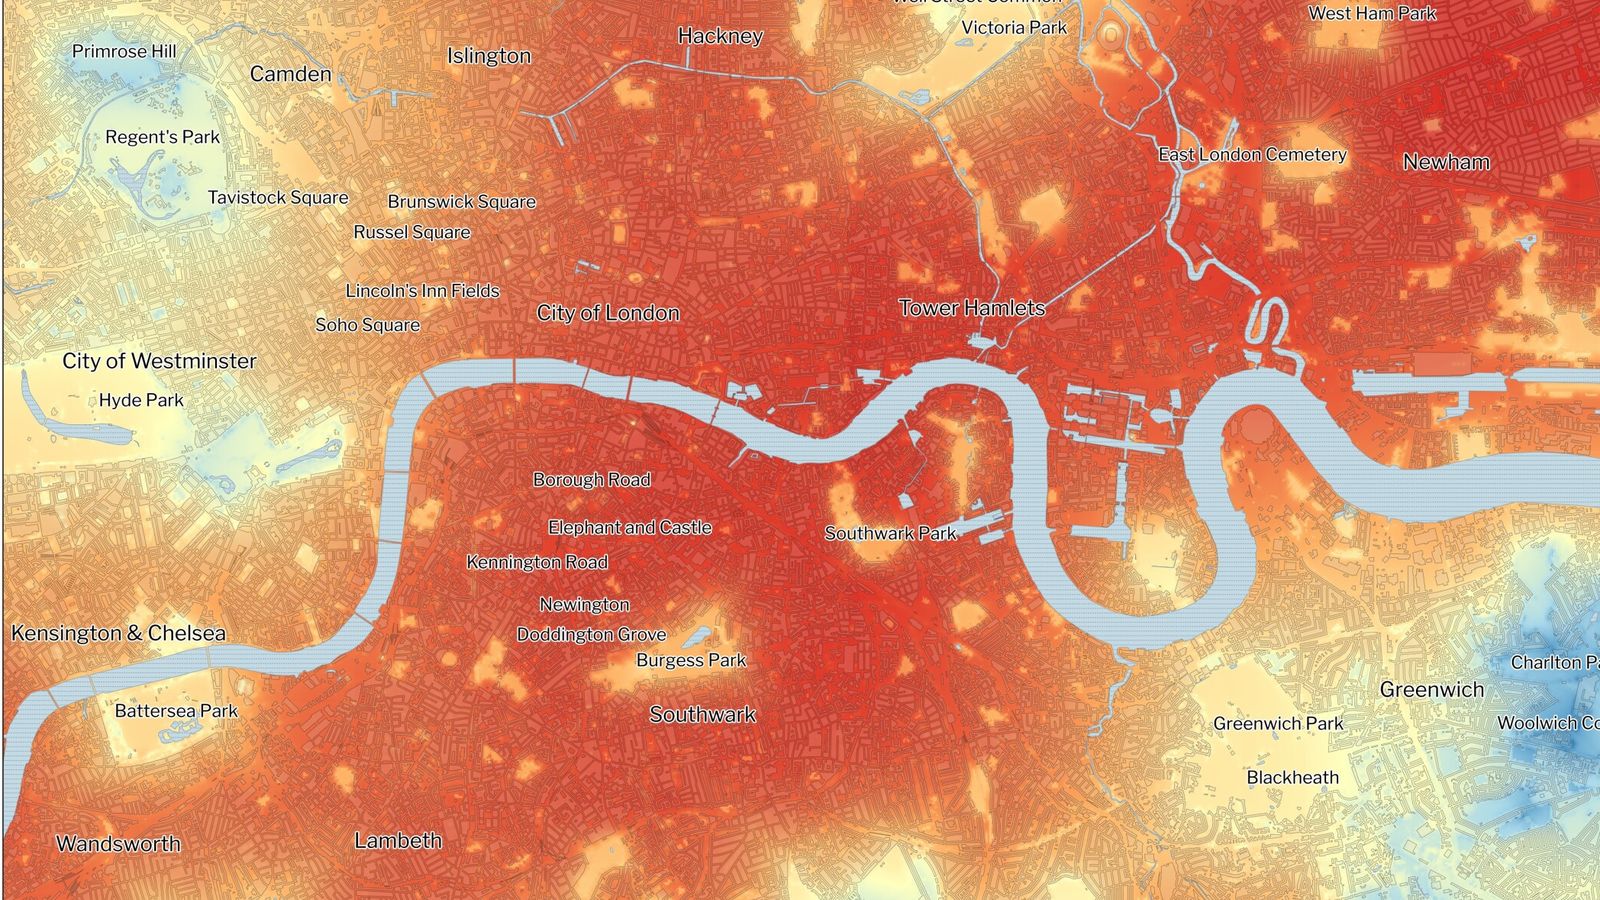 Heatmaps reveal the warmest and coolest areas of five English cities - and the impact of green spaces